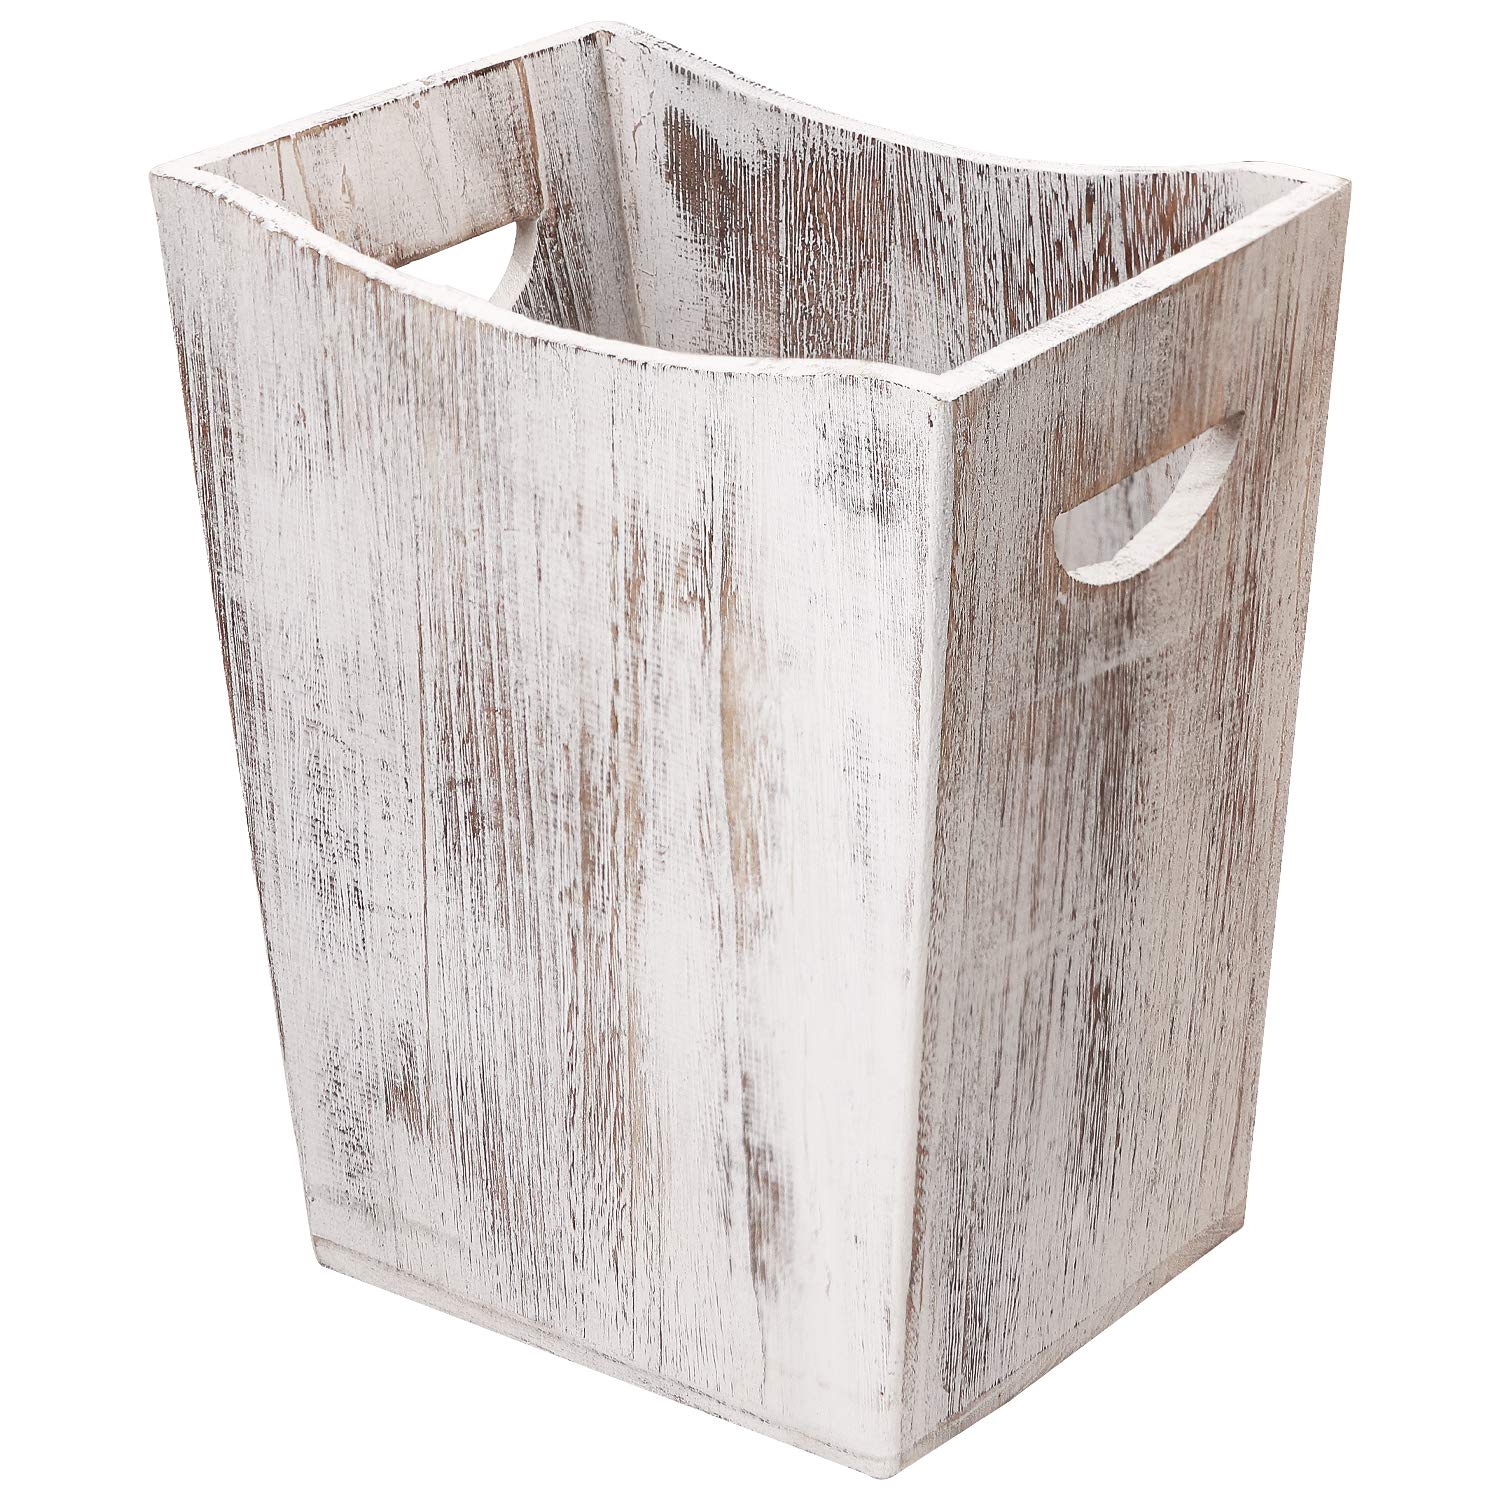 HONEST OUTFITTERS Distressed Wood Cute Wastebasket